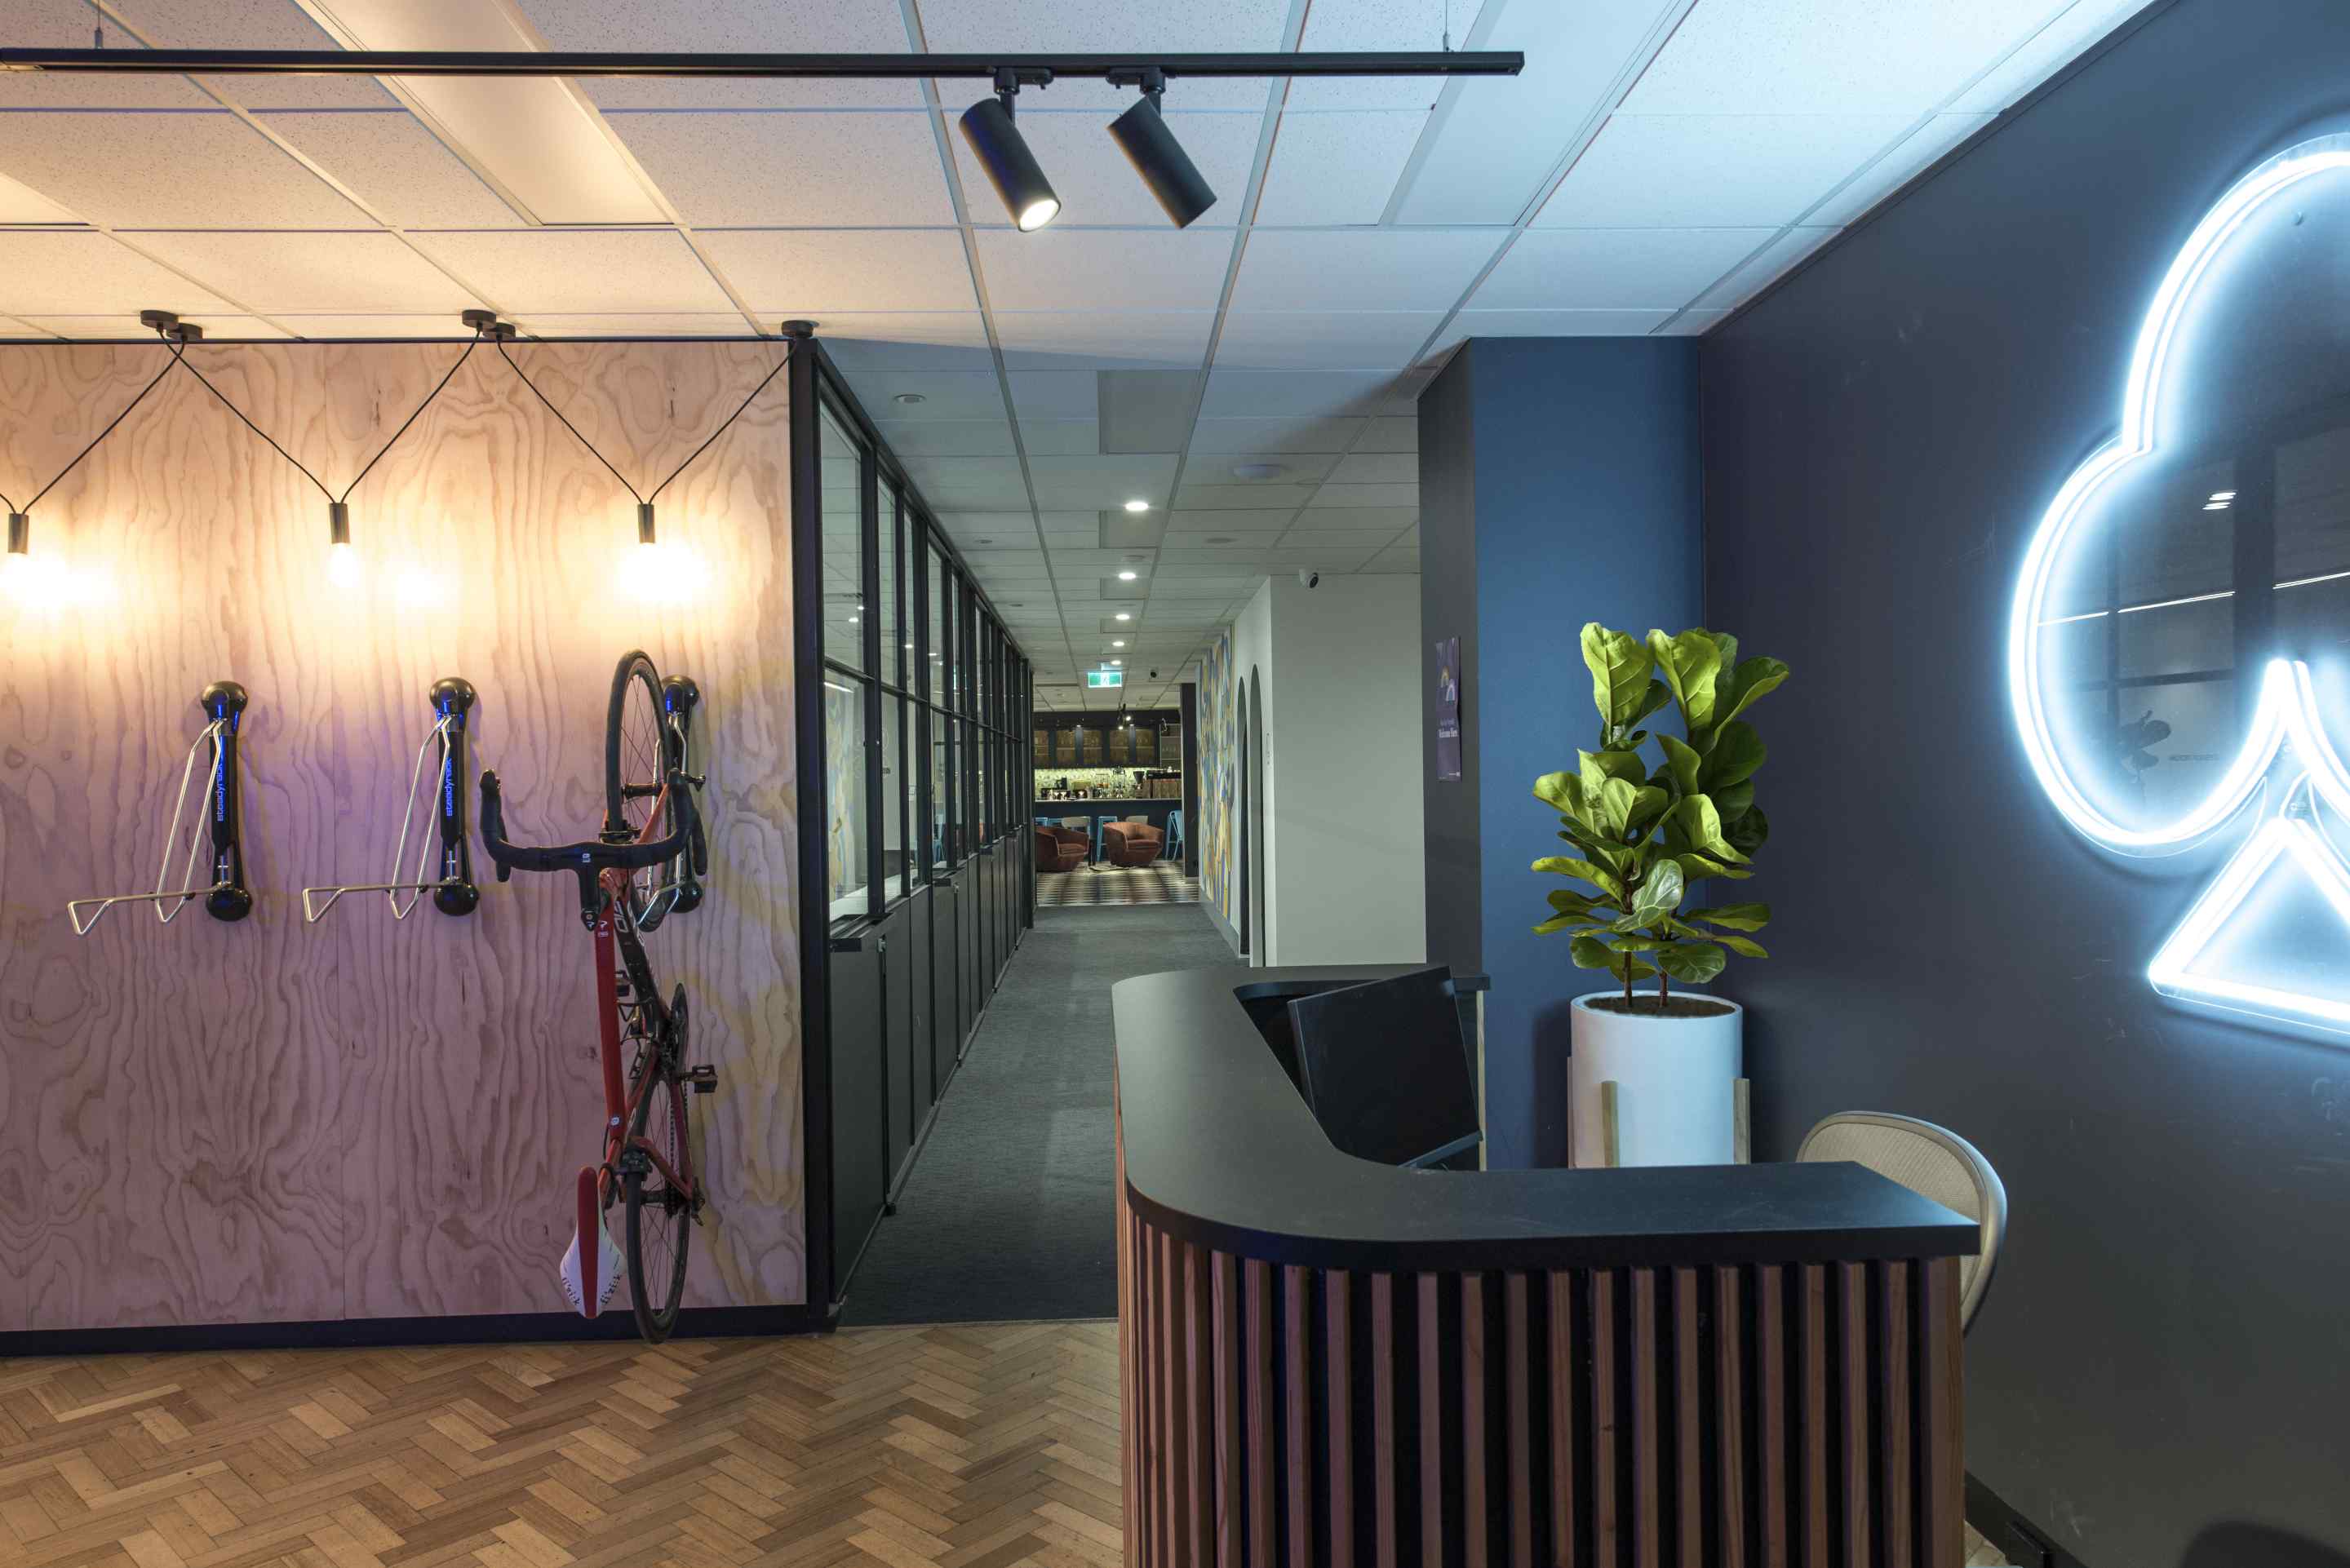 Memorable office branding for the company EasyGo designed by IN2 Space Interior Design and Project Management